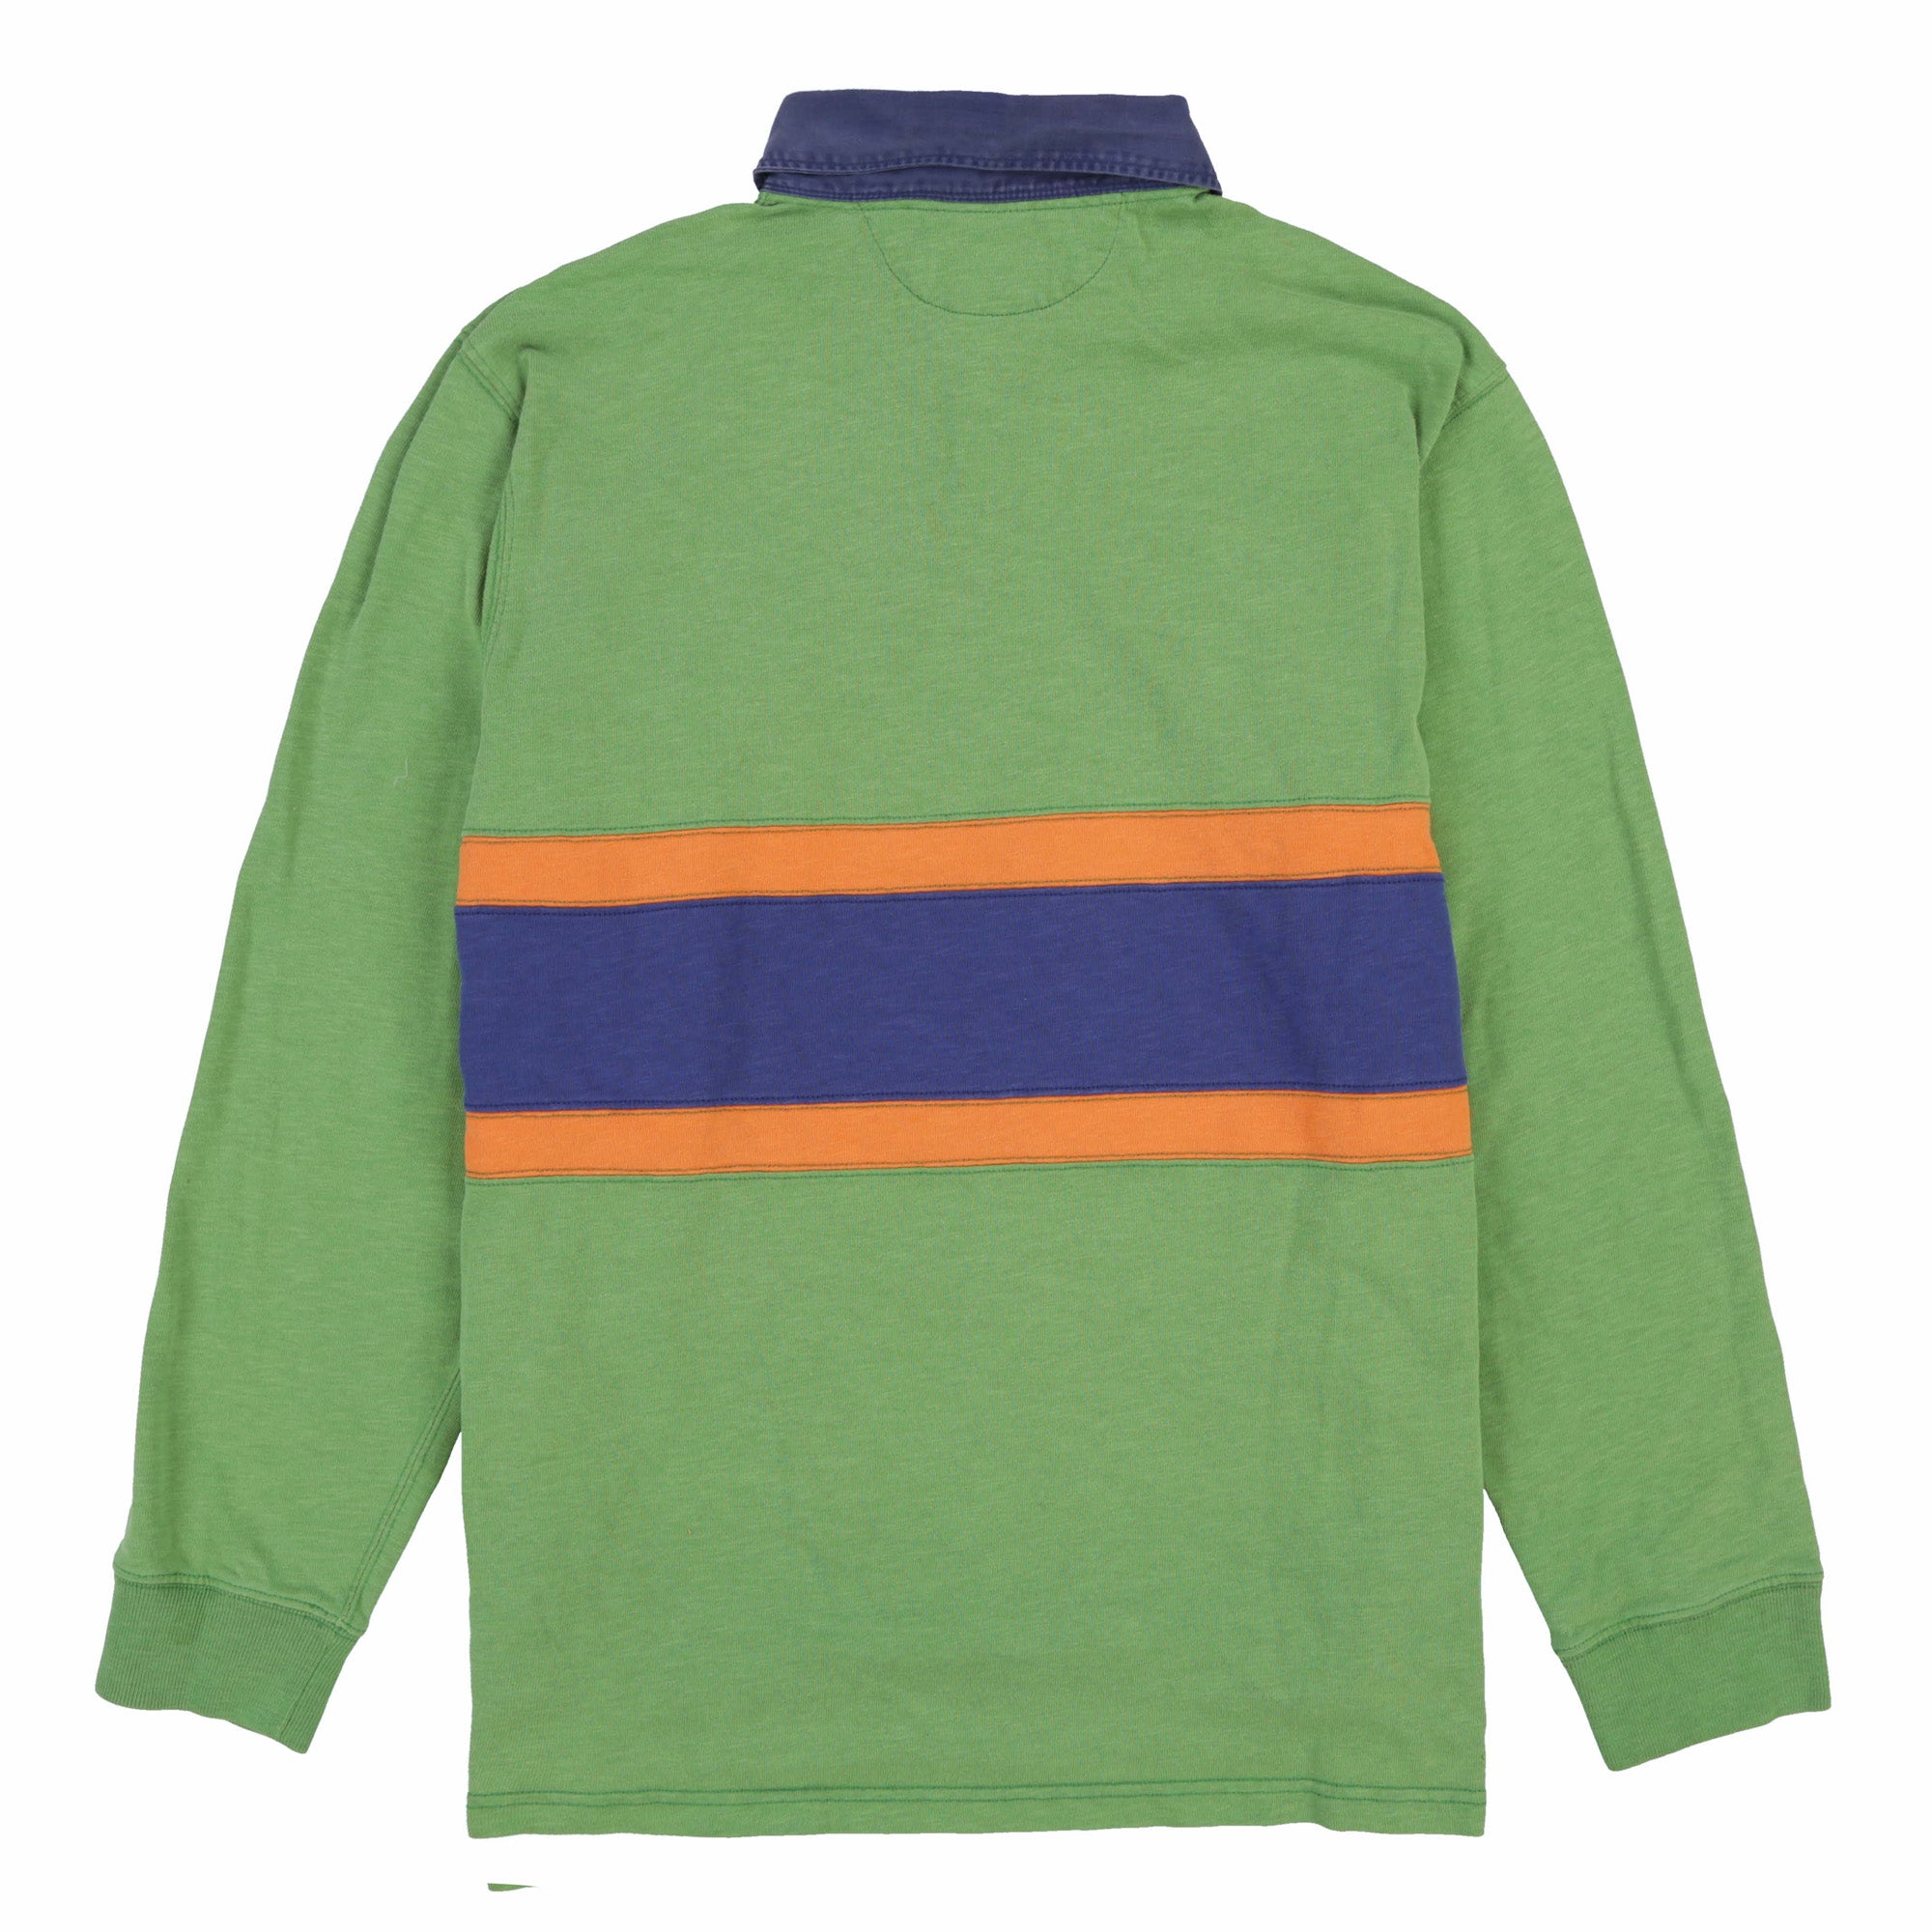 RUGBY EASTERN DIVISION LS POLO // BLUE GREEN ORANGE